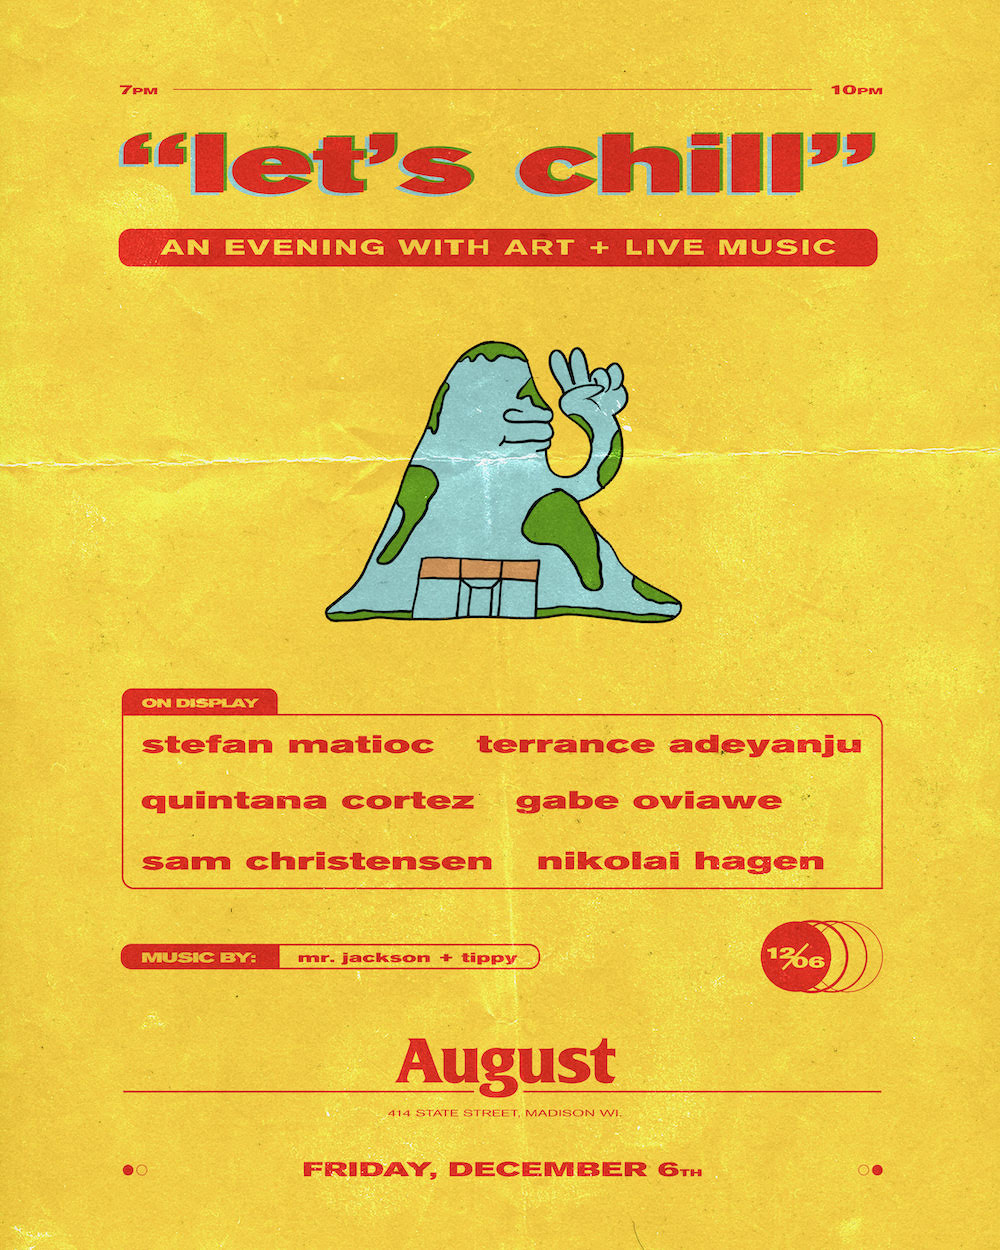 AUGUST ART COLLECTIVE :: "LET'S CHILL"